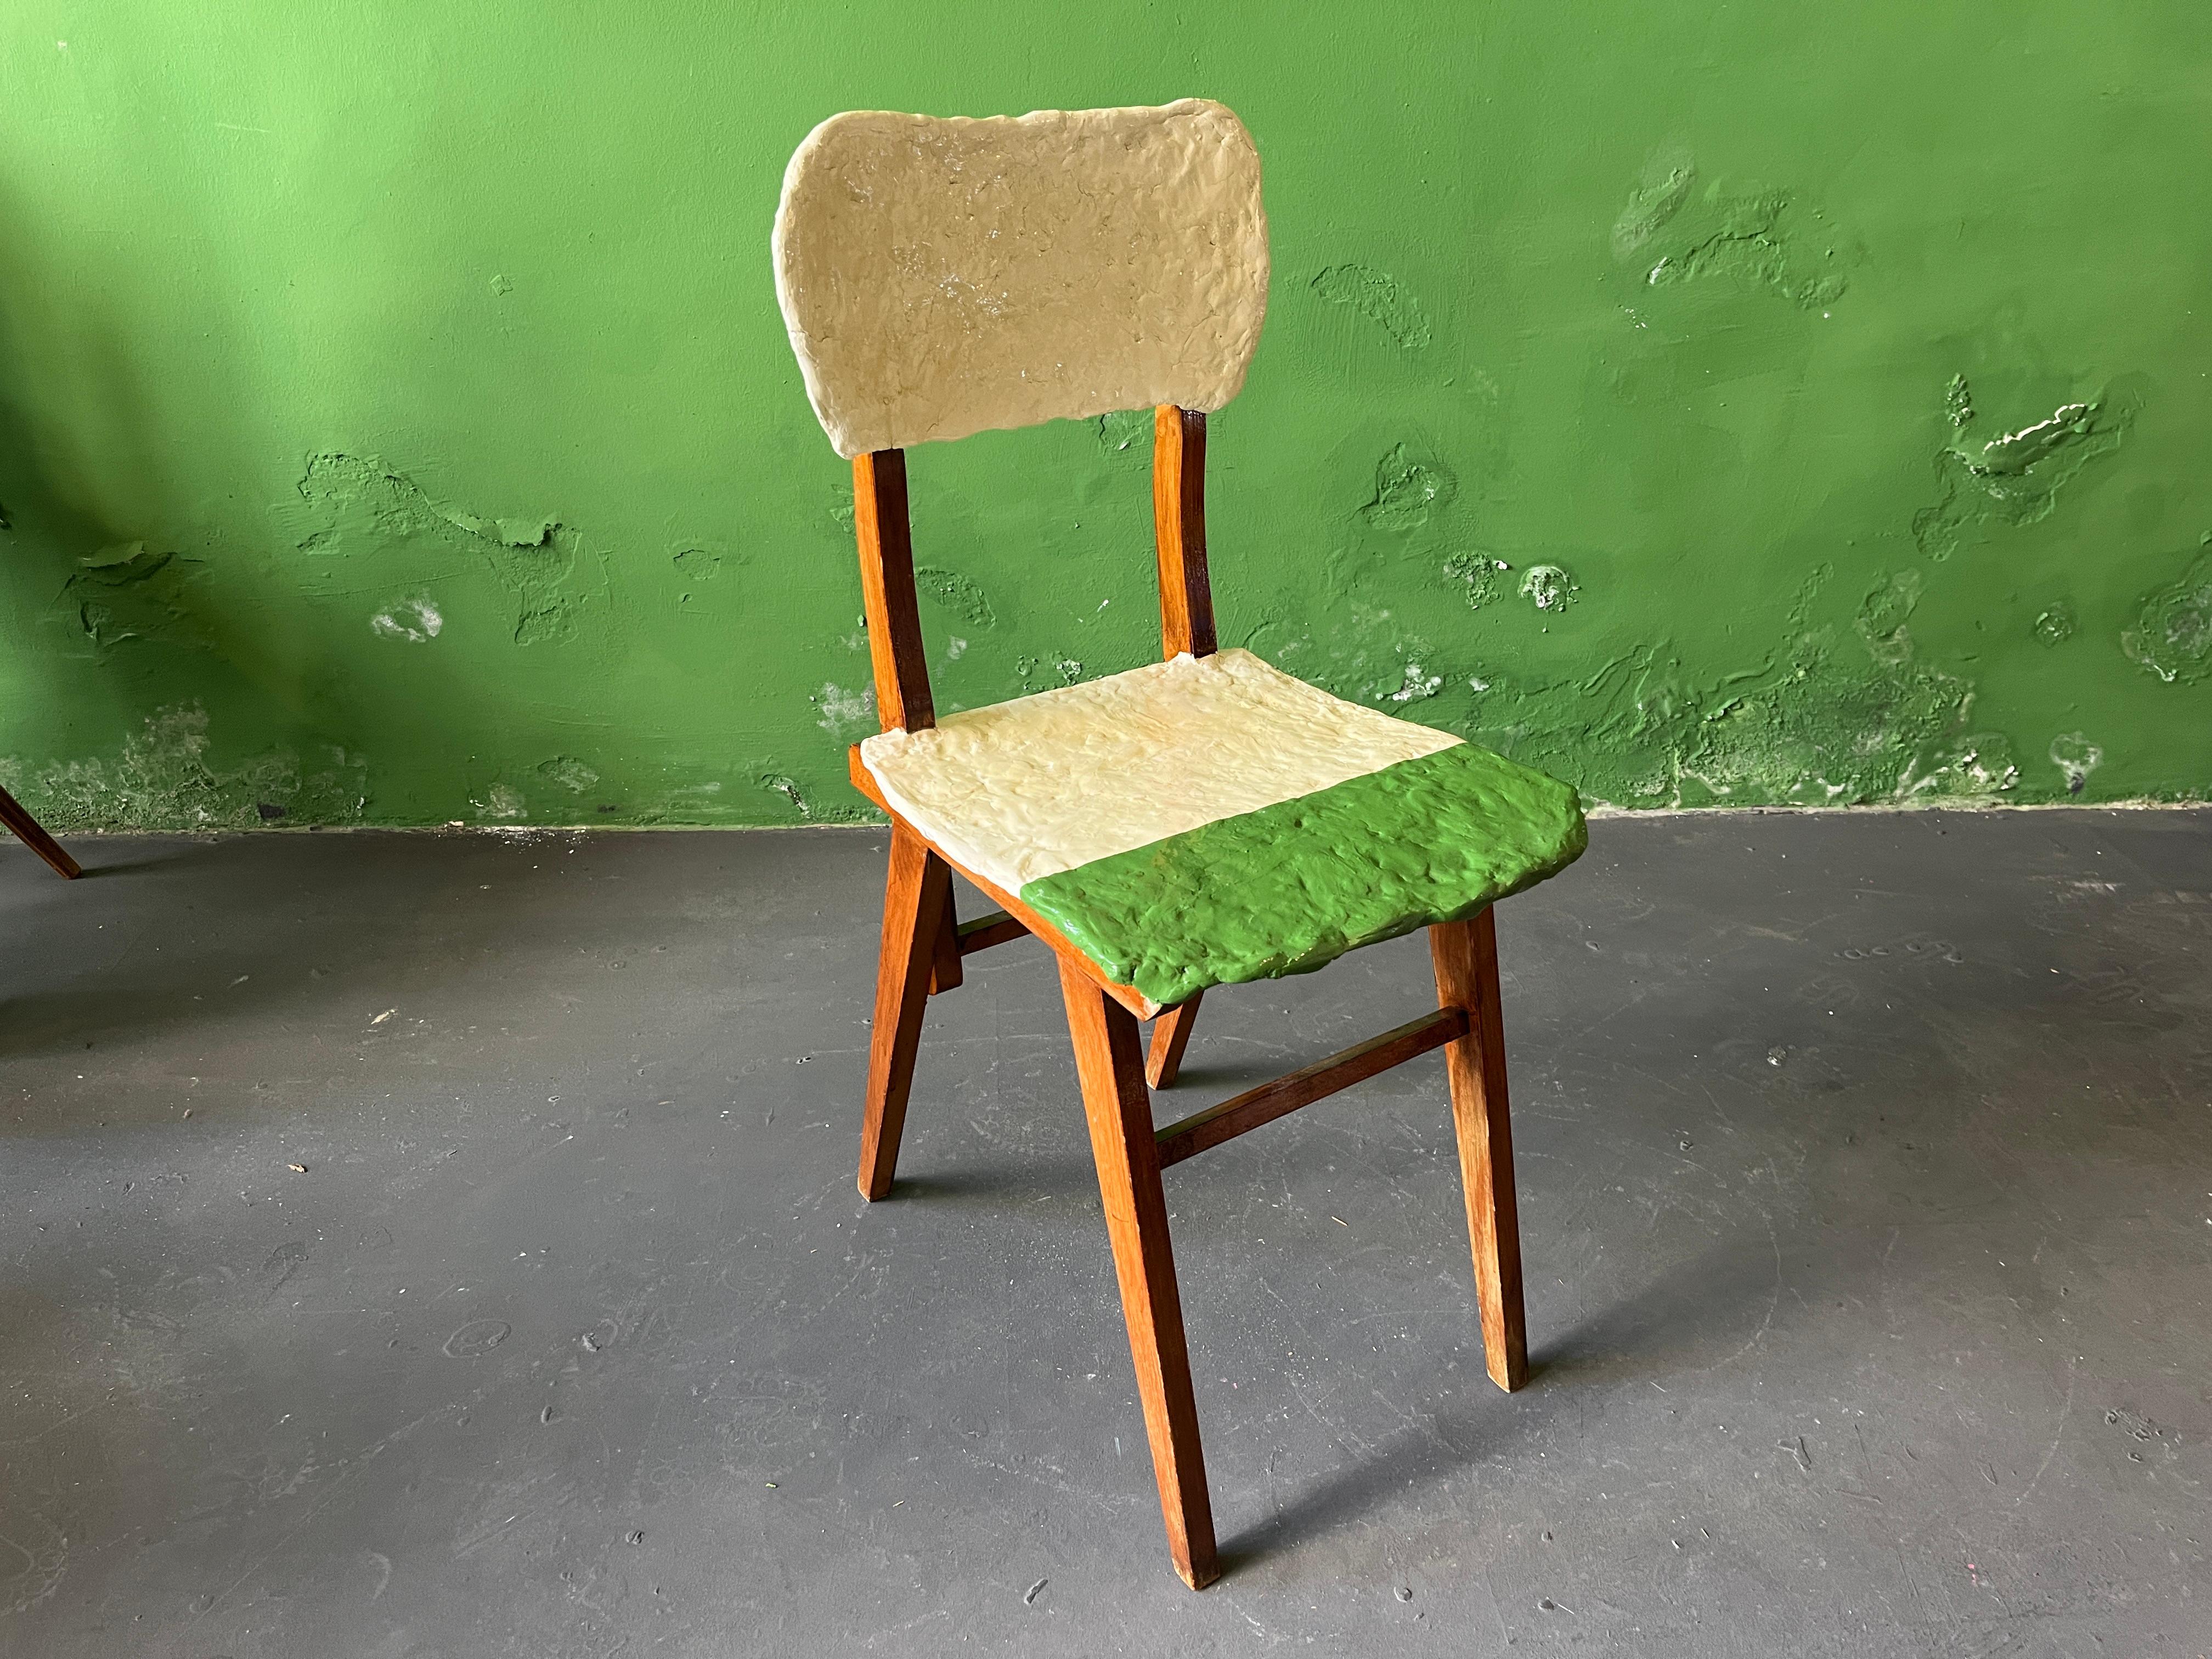 Pilion Chair, Ceramic Seat and Backrest by Markus Friedrich Staab For Sale 4